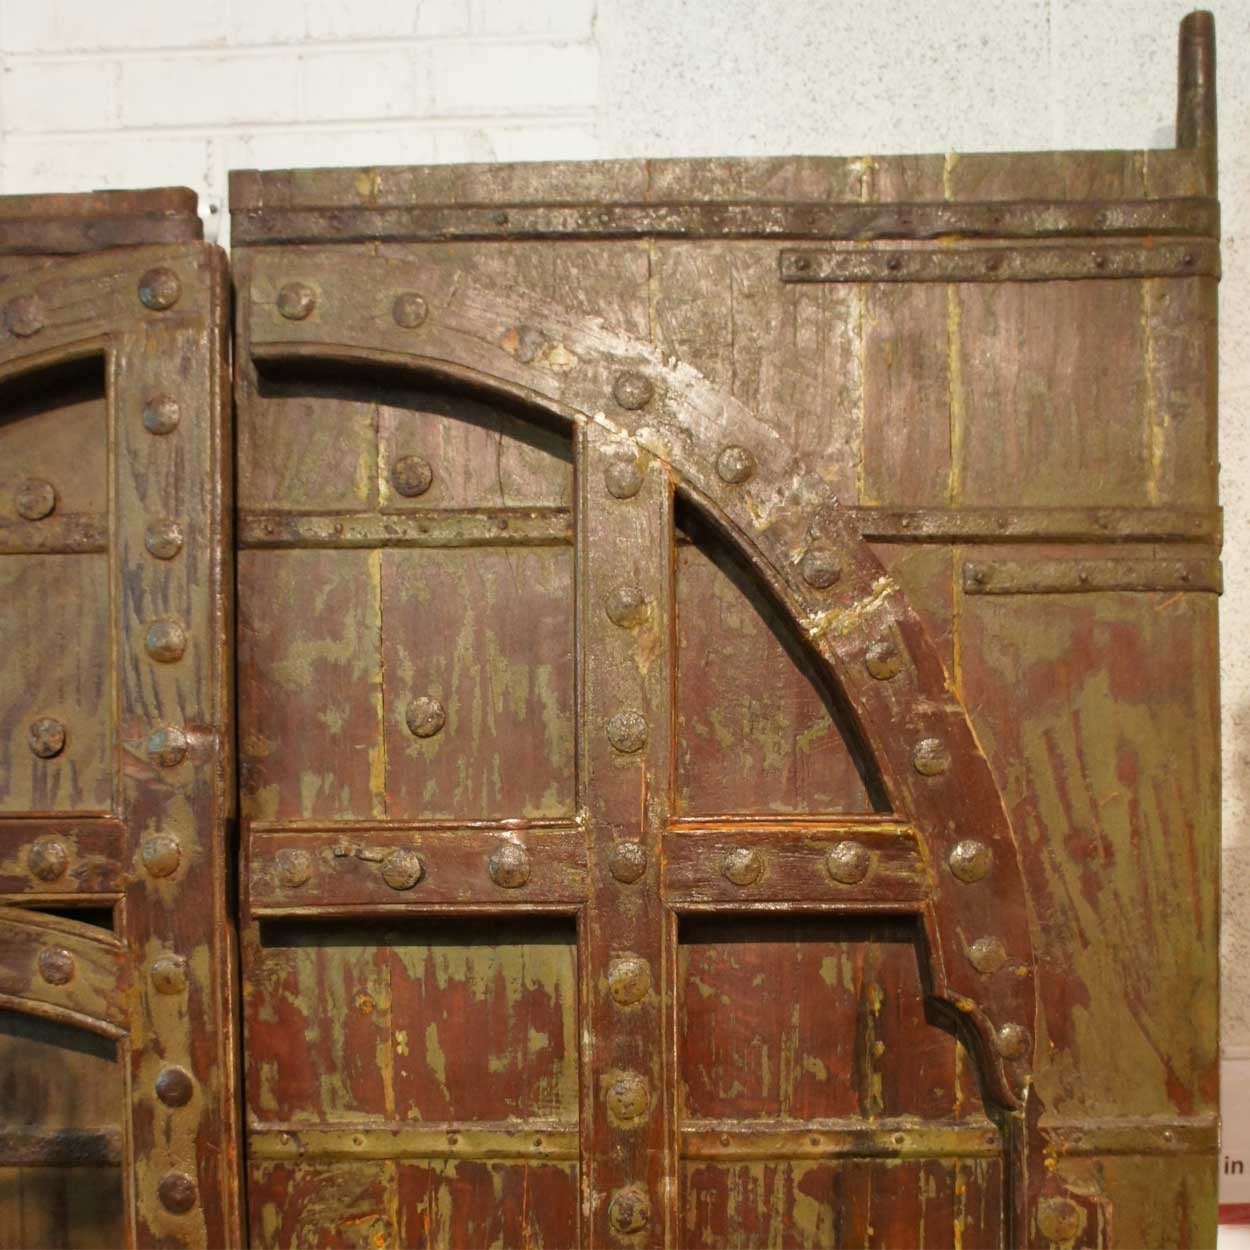 This massive, antique Indian double-door gate features an inset pedestrian door for ease of entry. Built for strength, they are crafted of thick teak with iron strapping and hand-forged nails. It is decorated with traditional thick, arched moldings